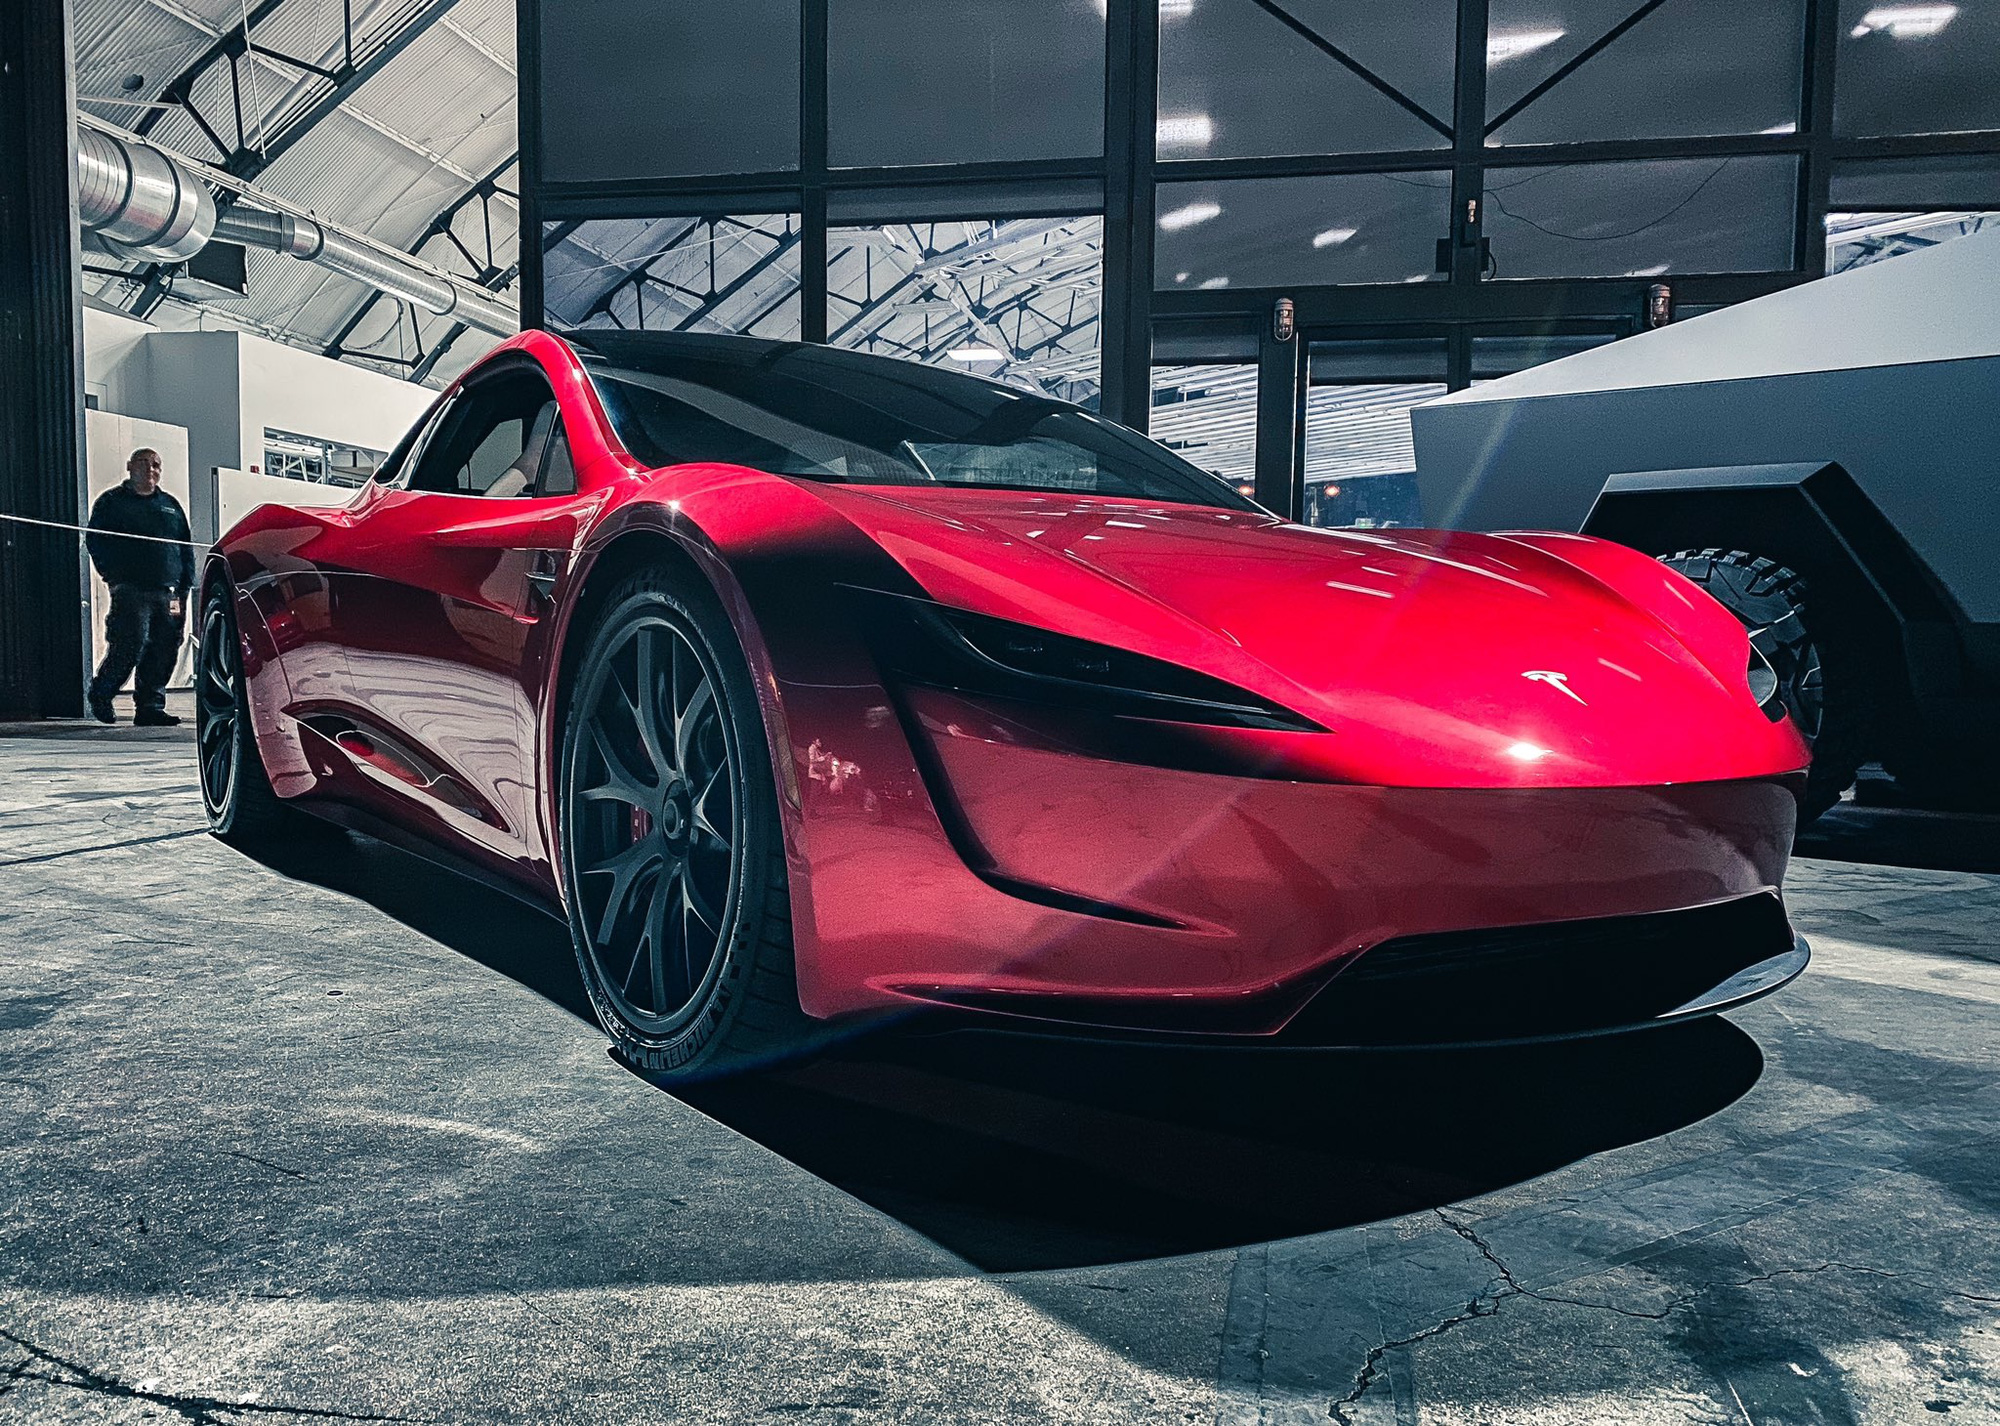 bao elon musk s personal gift of a tesla roadster electric car to mike tyson as the main sponsor for his mma return took everyone by surprise 654a5ea76ea85 Elon Musk's Personal Gift Of A Tesla Roadster Electric Car To Mike Tyson As The Main Sponsor For His 2024 Mma Return Took Everyone By Surprise.